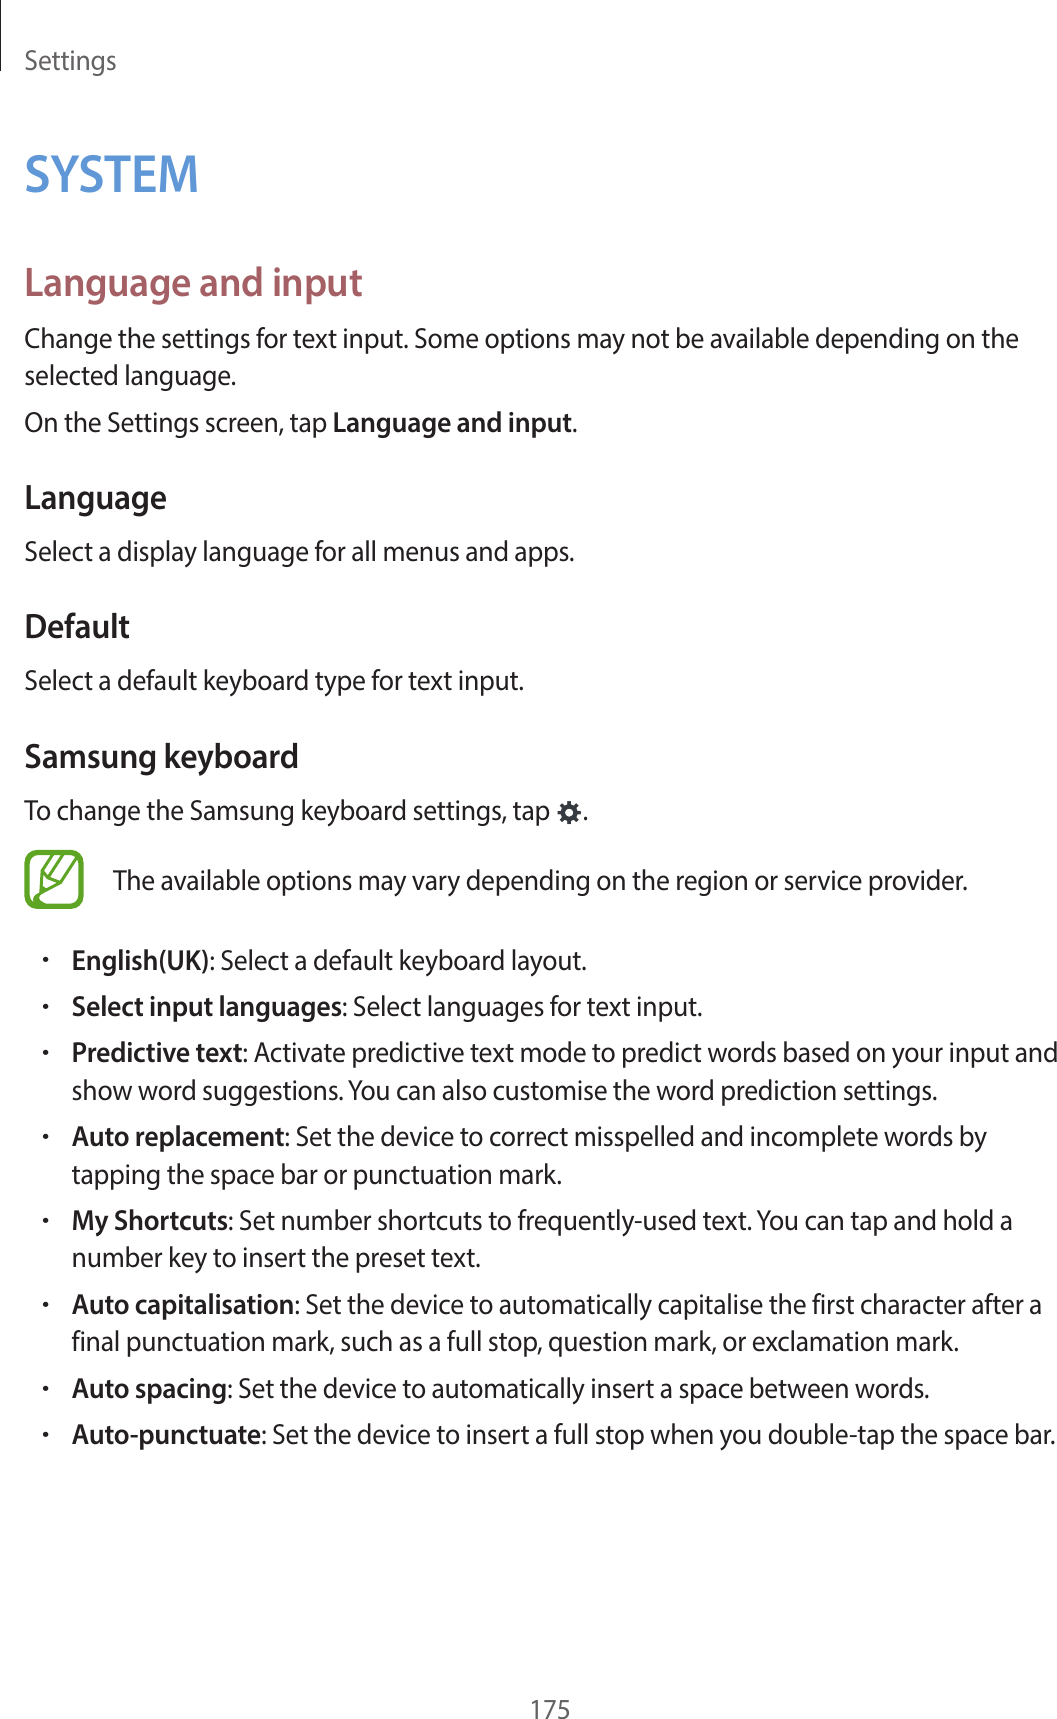 Settings175SYSTEMLanguage and inputChange the settings for text input. Some options may not be available depending on the selected language.On the Settings screen, tap Language and input.LanguageSelect a display language for all menus and apps.DefaultSelect a default keyboard type for text input.Samsung keyboardTo change the Samsung keyboard settings, tap  .The available options may vary depending on the region or service provider.•English(UK): Select a default keyboard layout.•Select input languages: Select languages for text input.•Predictive text: Activate predictive text mode to predict words based on your input and show word suggestions. You can also customise the word prediction settings.•Auto replacement: Set the device to correct misspelled and incomplete words by tapping the space bar or punctuation mark.•My Shortcuts: Set number shortcuts to frequently-used text. You can tap and hold a number key to insert the preset text.•Auto capitalisation: Set the device to automatically capitalise the first character after a final punctuation mark, such as a full stop, question mark, or exclamation mark.•Auto spacing: Set the device to automatically insert a space between words.•Auto-punctuate: Set the device to insert a full stop when you double-tap the space bar.